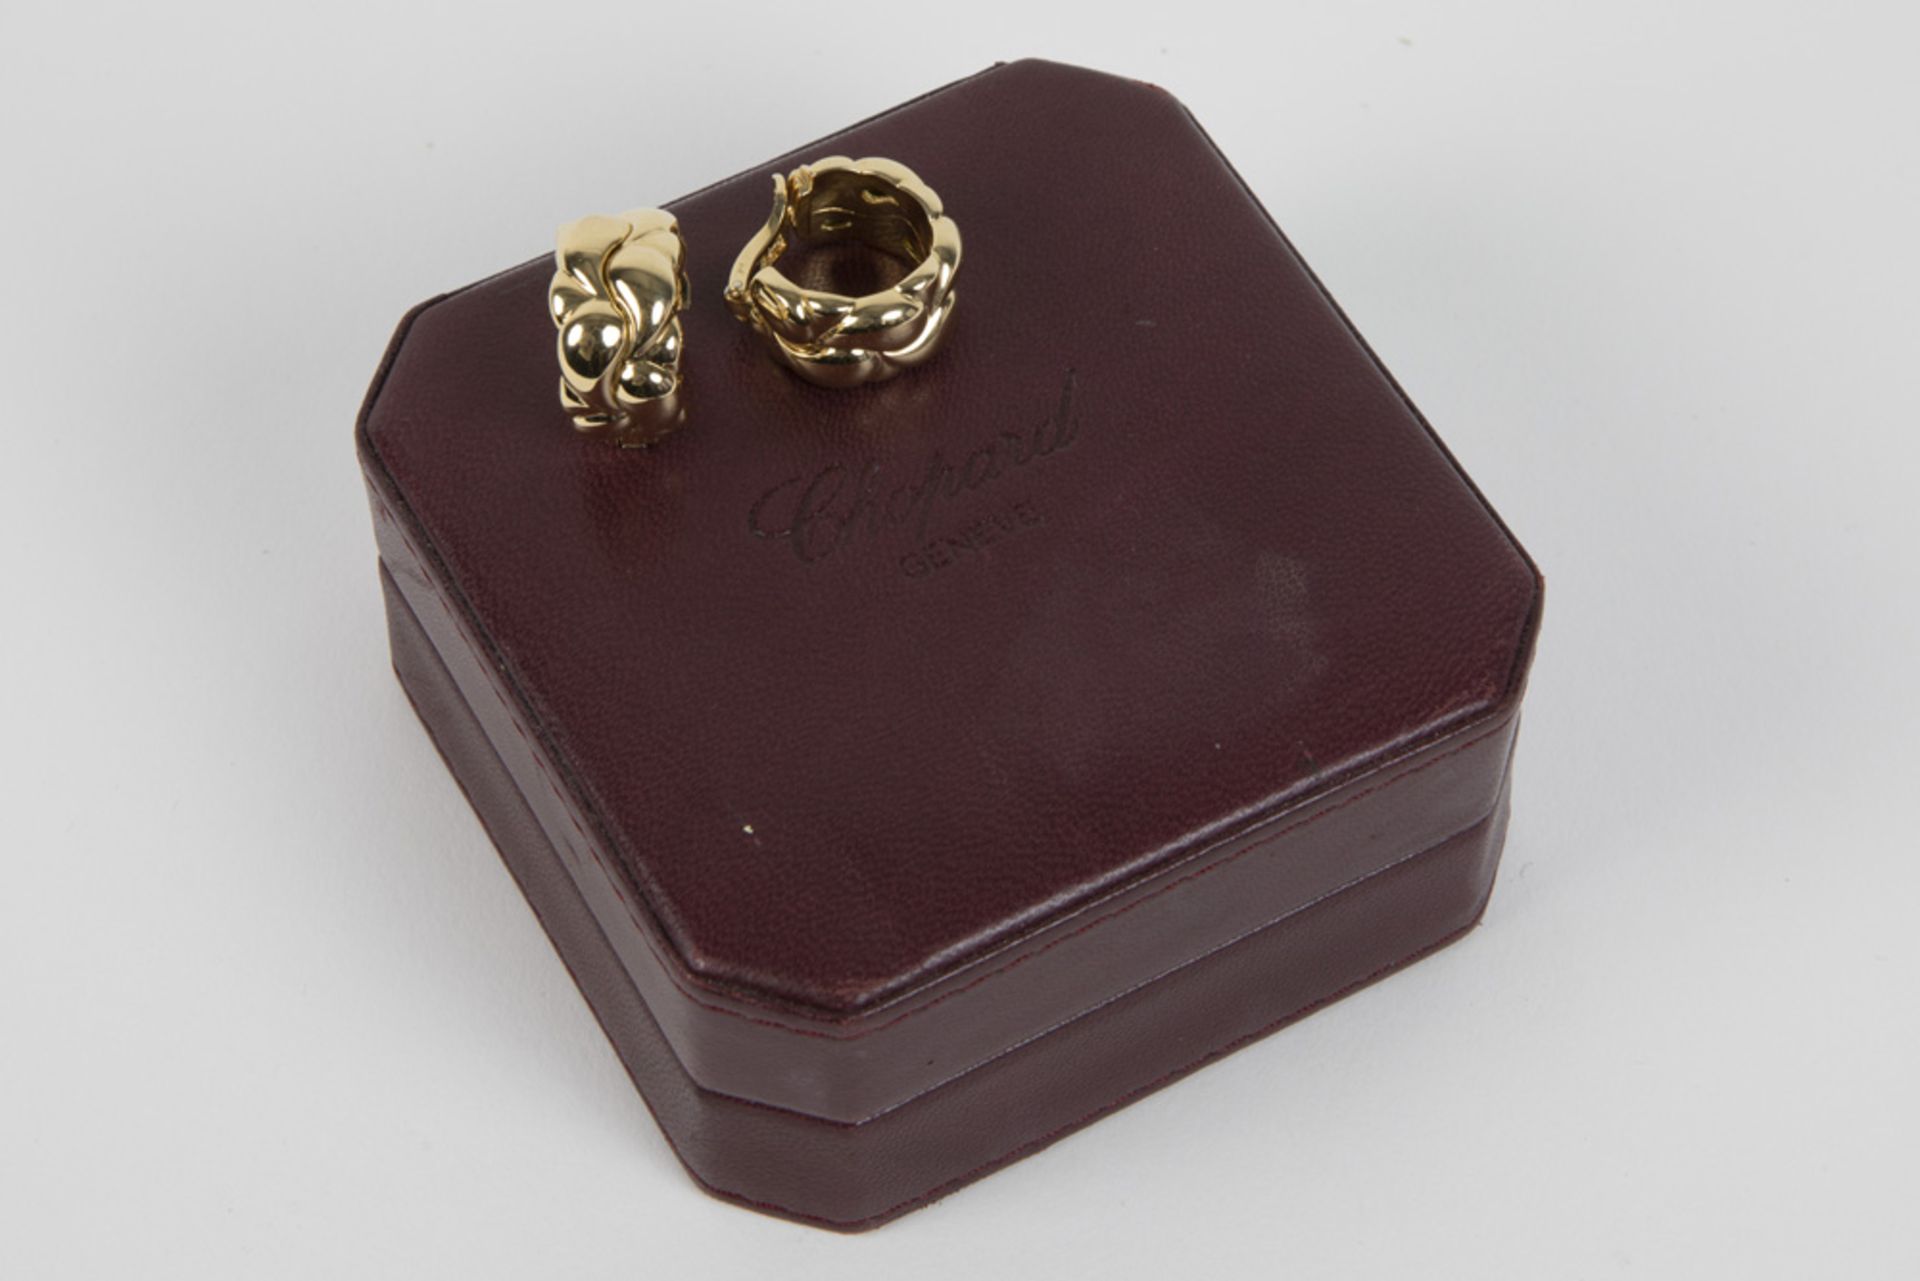 pair of Chopard signed earrings in yellow gold (18 carat) - with their original box||CHOPARD paar - Image 2 of 2